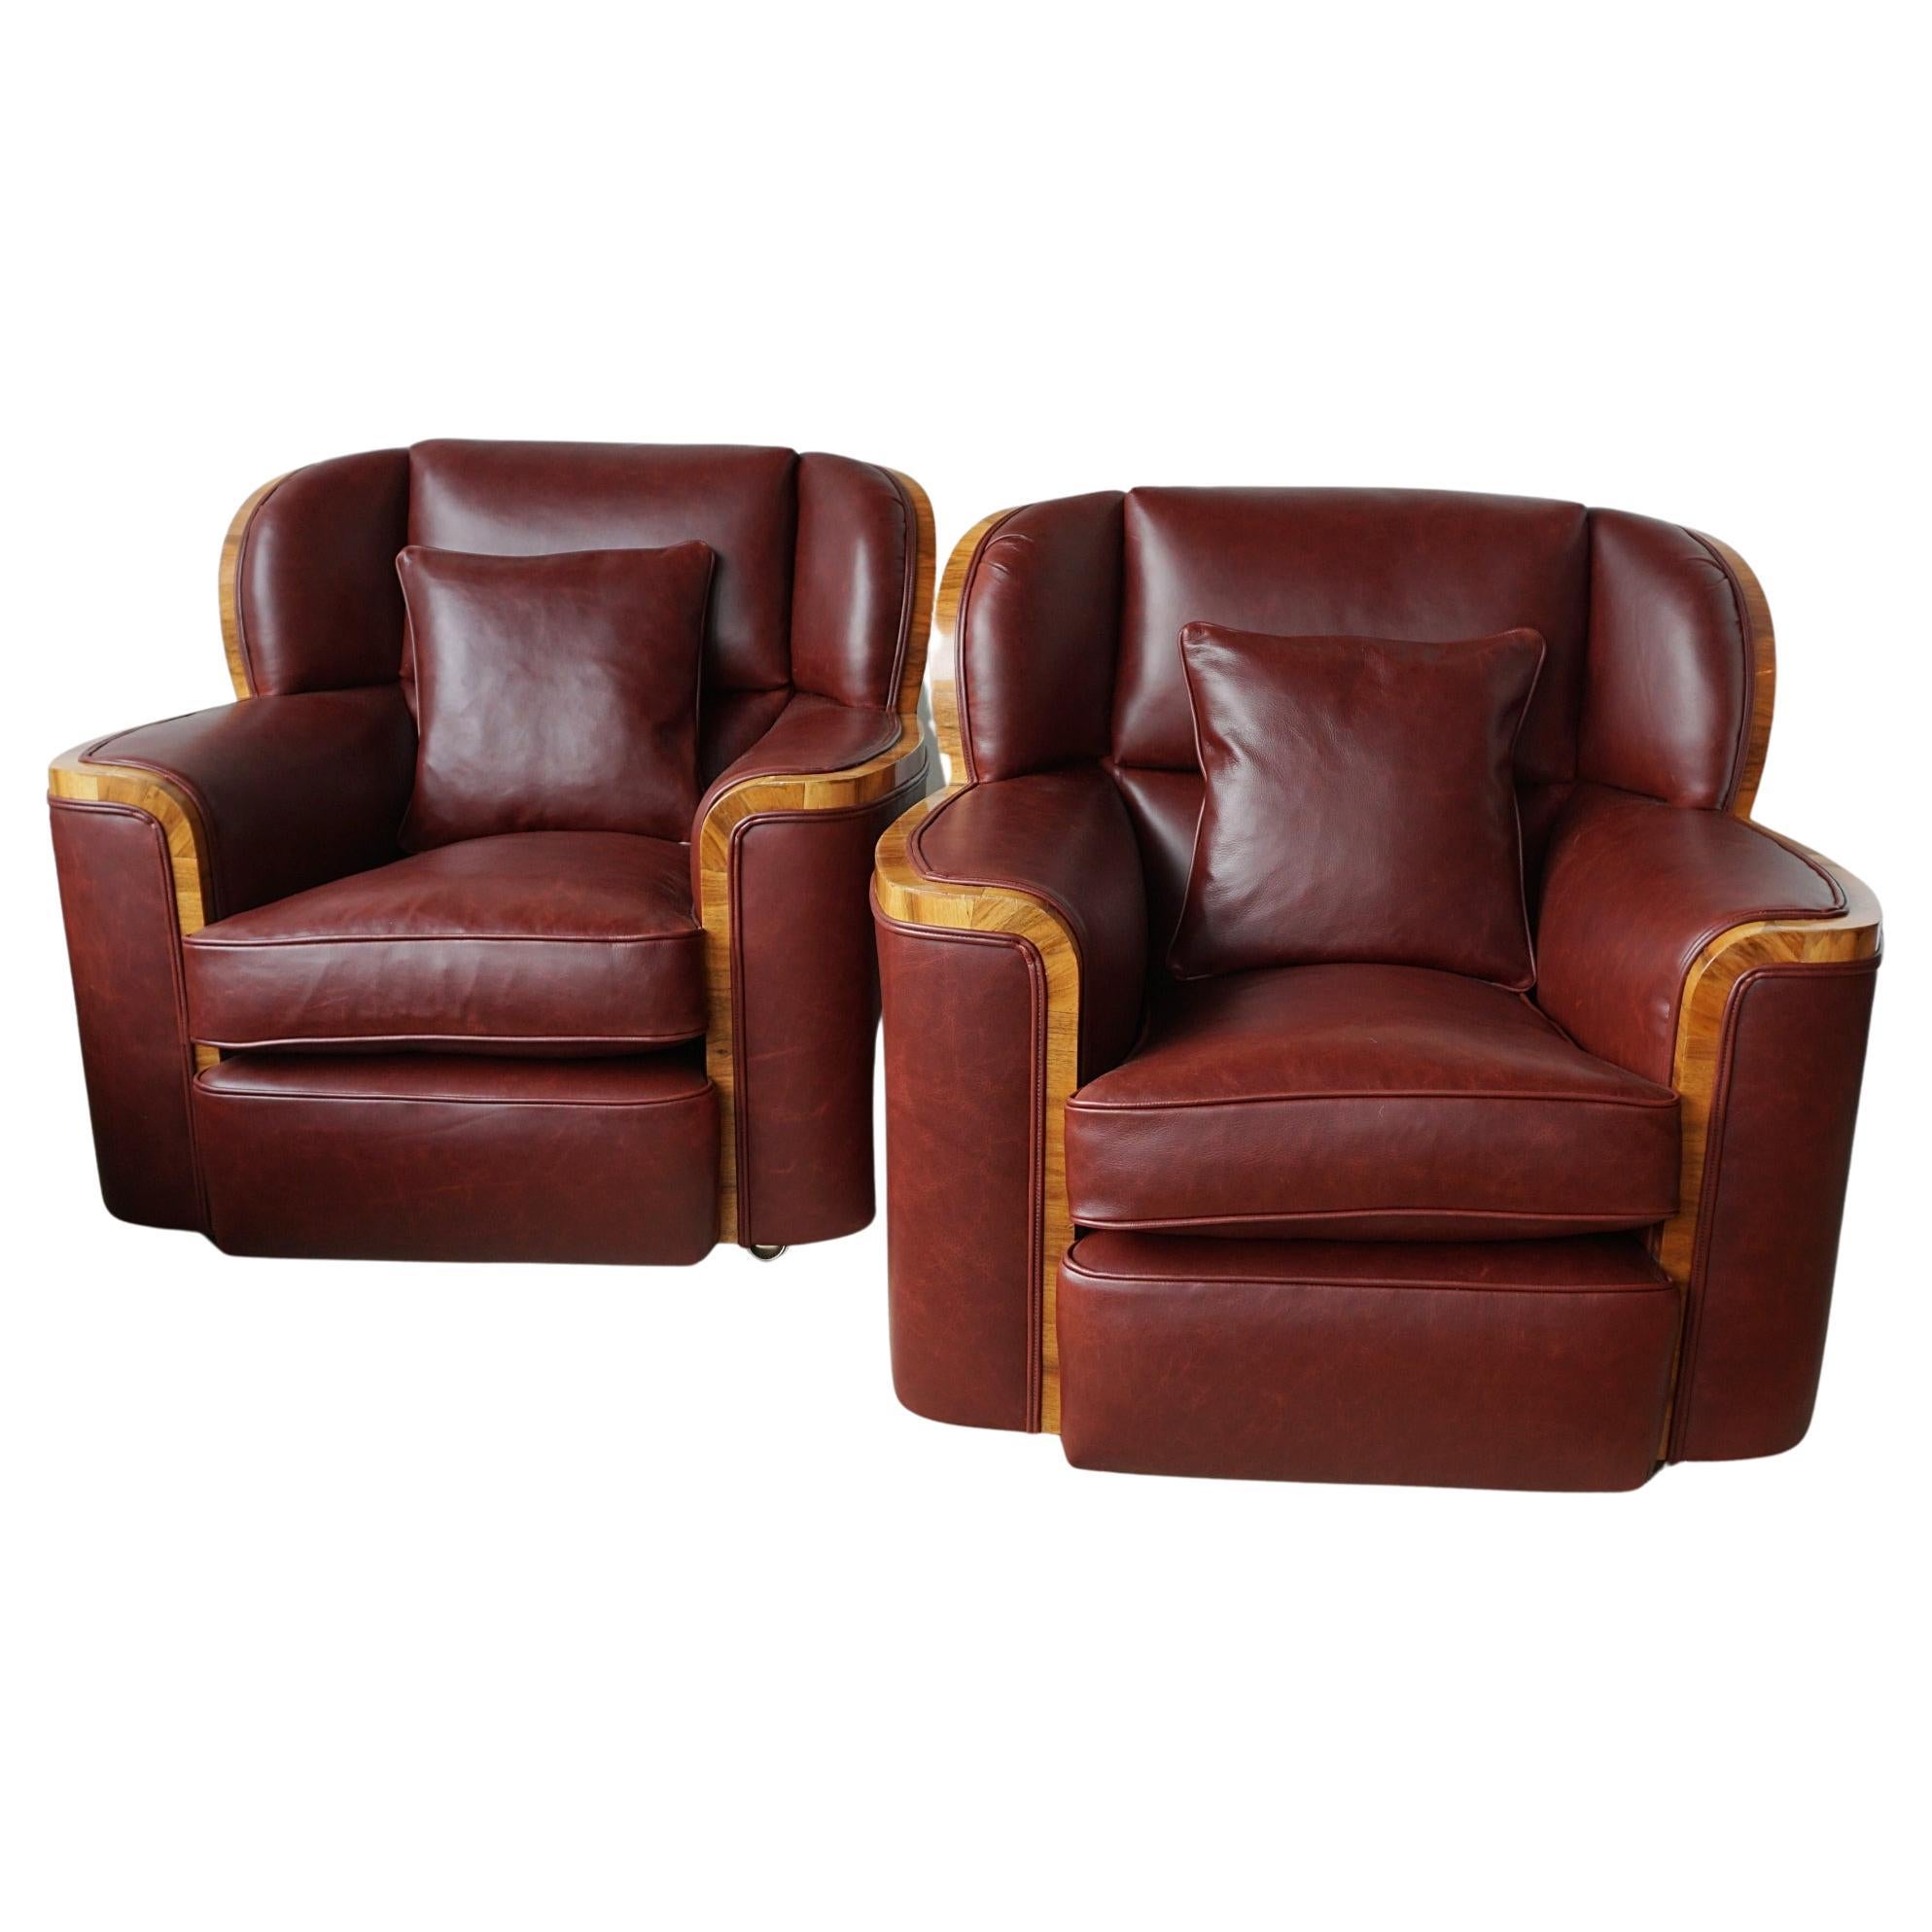 Original Art Deco Chestnut Leather and Walnut Bankers Armchairs 